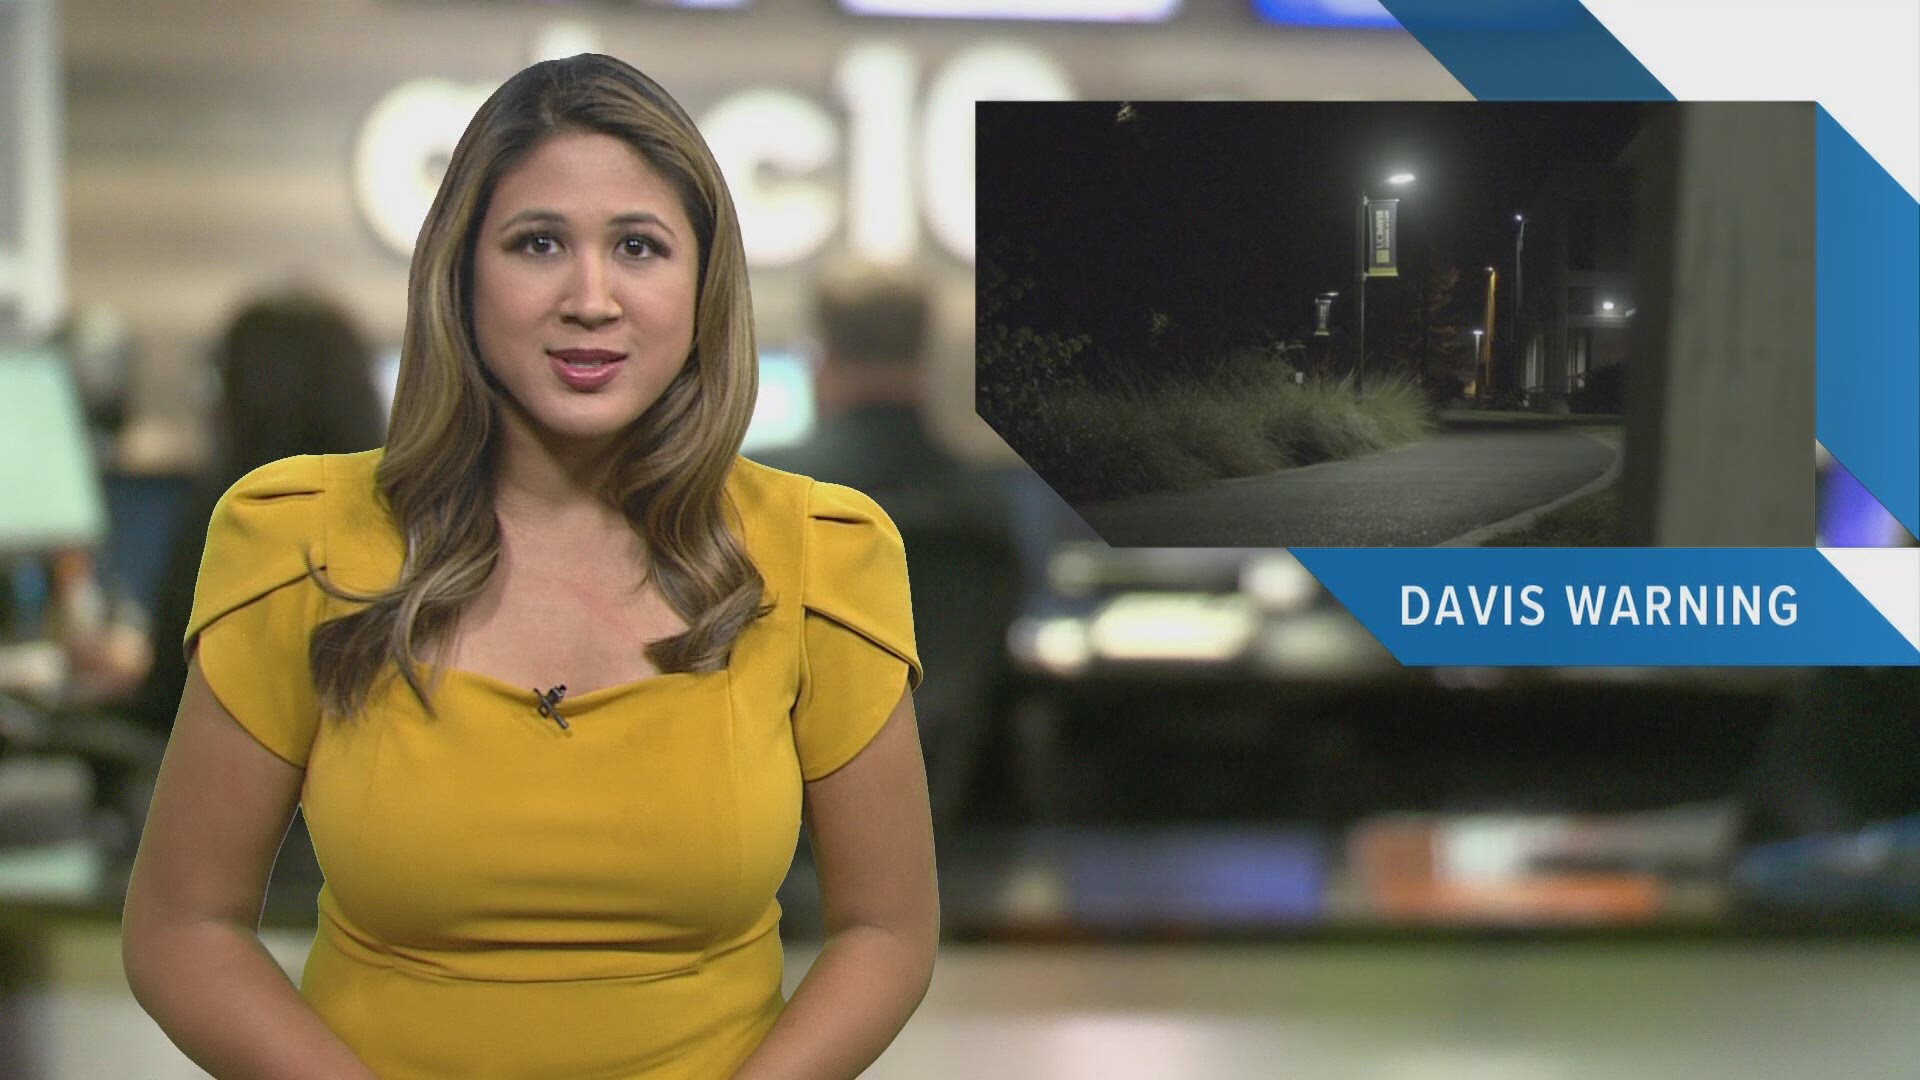 Evening Headlines: Oct. 20, 2019 | Catch in-depth reporting on #LateNewsTonight at 11 p.m. | The latest Sacramento news is always at www.abc10.com.